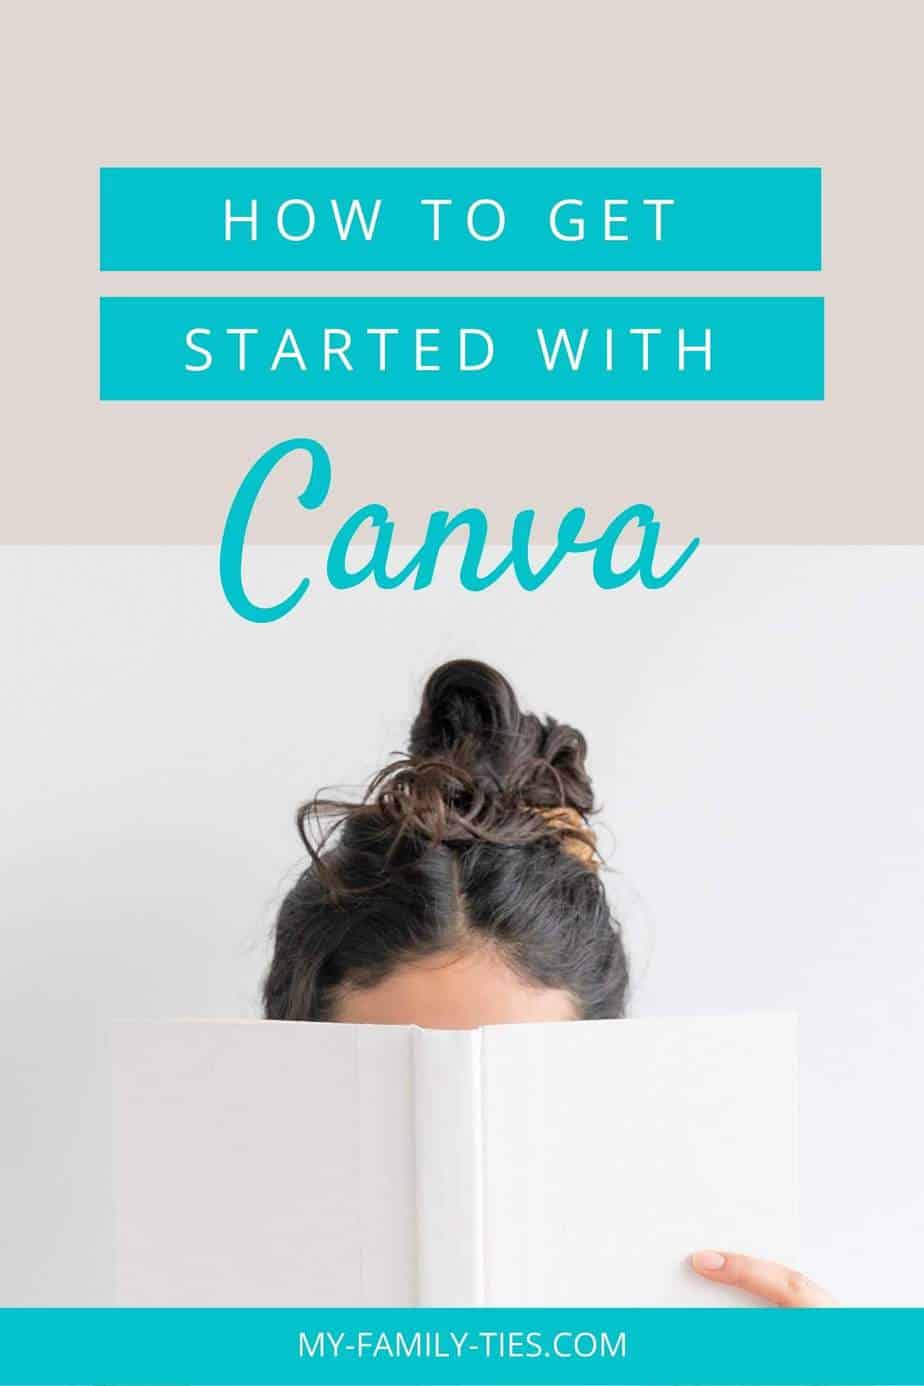 Canva is a wonderful tool for creating visual content ideal for bloggers, entrepreneurs and small business owners. In this guide, learn how to get started with your graphic design projects today!
#CanvaTutorial #Blogging #CanvaTips #CanvaDesign #DesignTips #Entrepreneur #GirlBoss